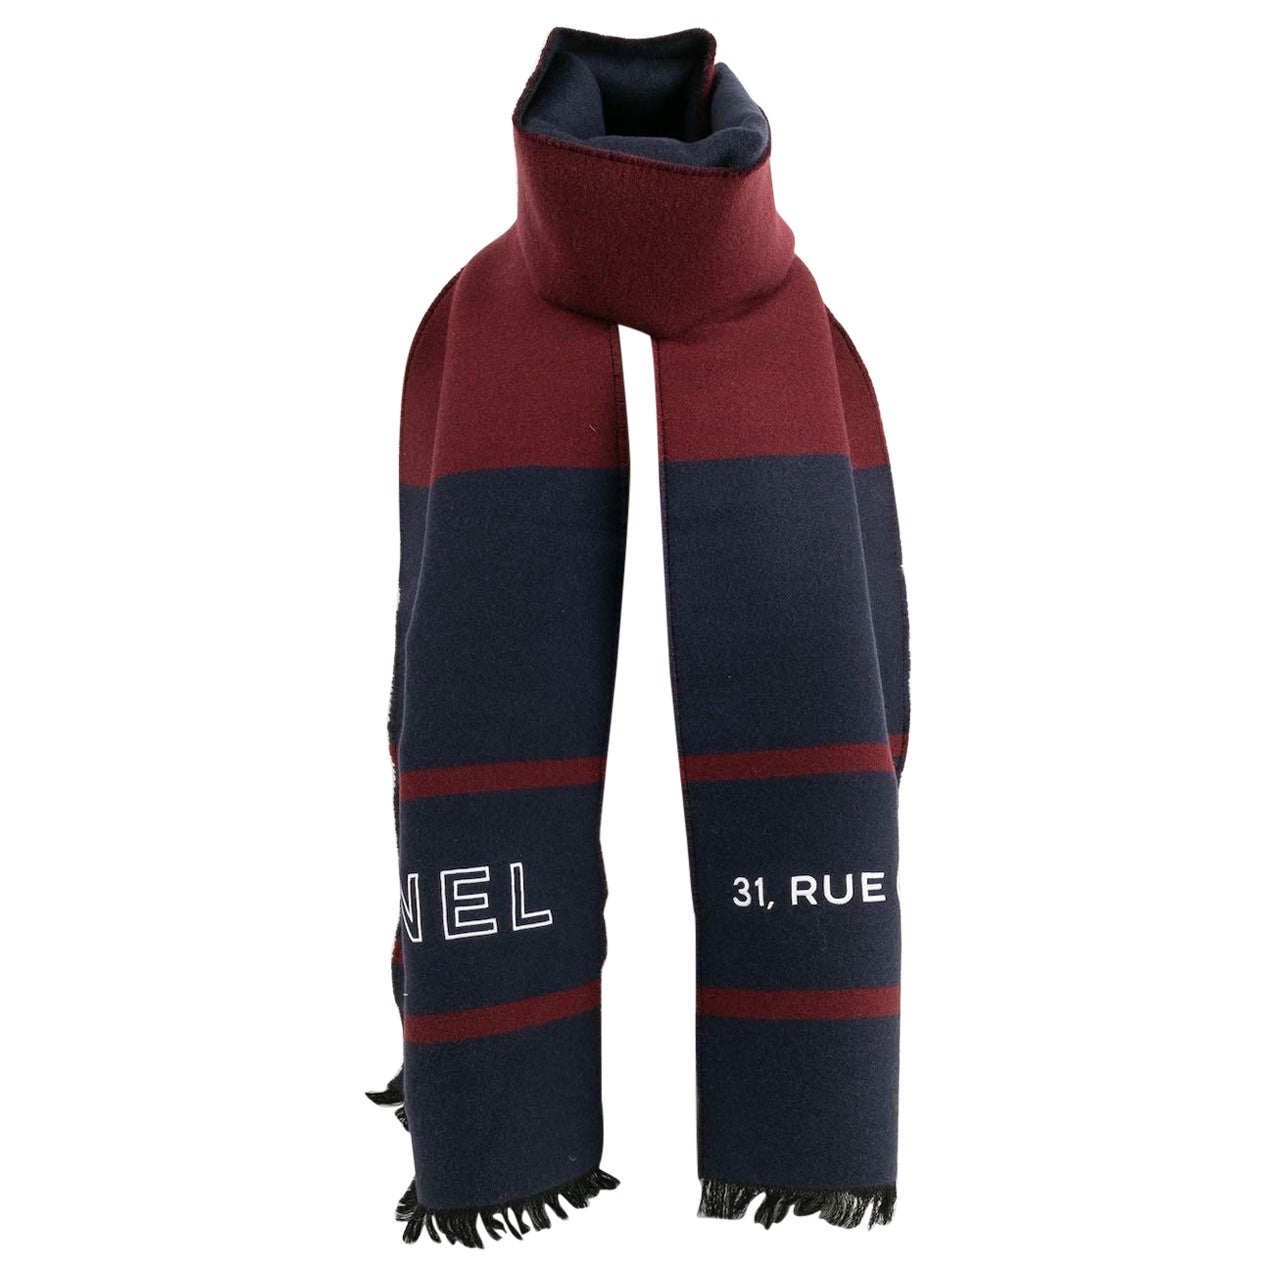 Amazing Vintage Burgundy Blue and White Cashmere Scarf by Chanel